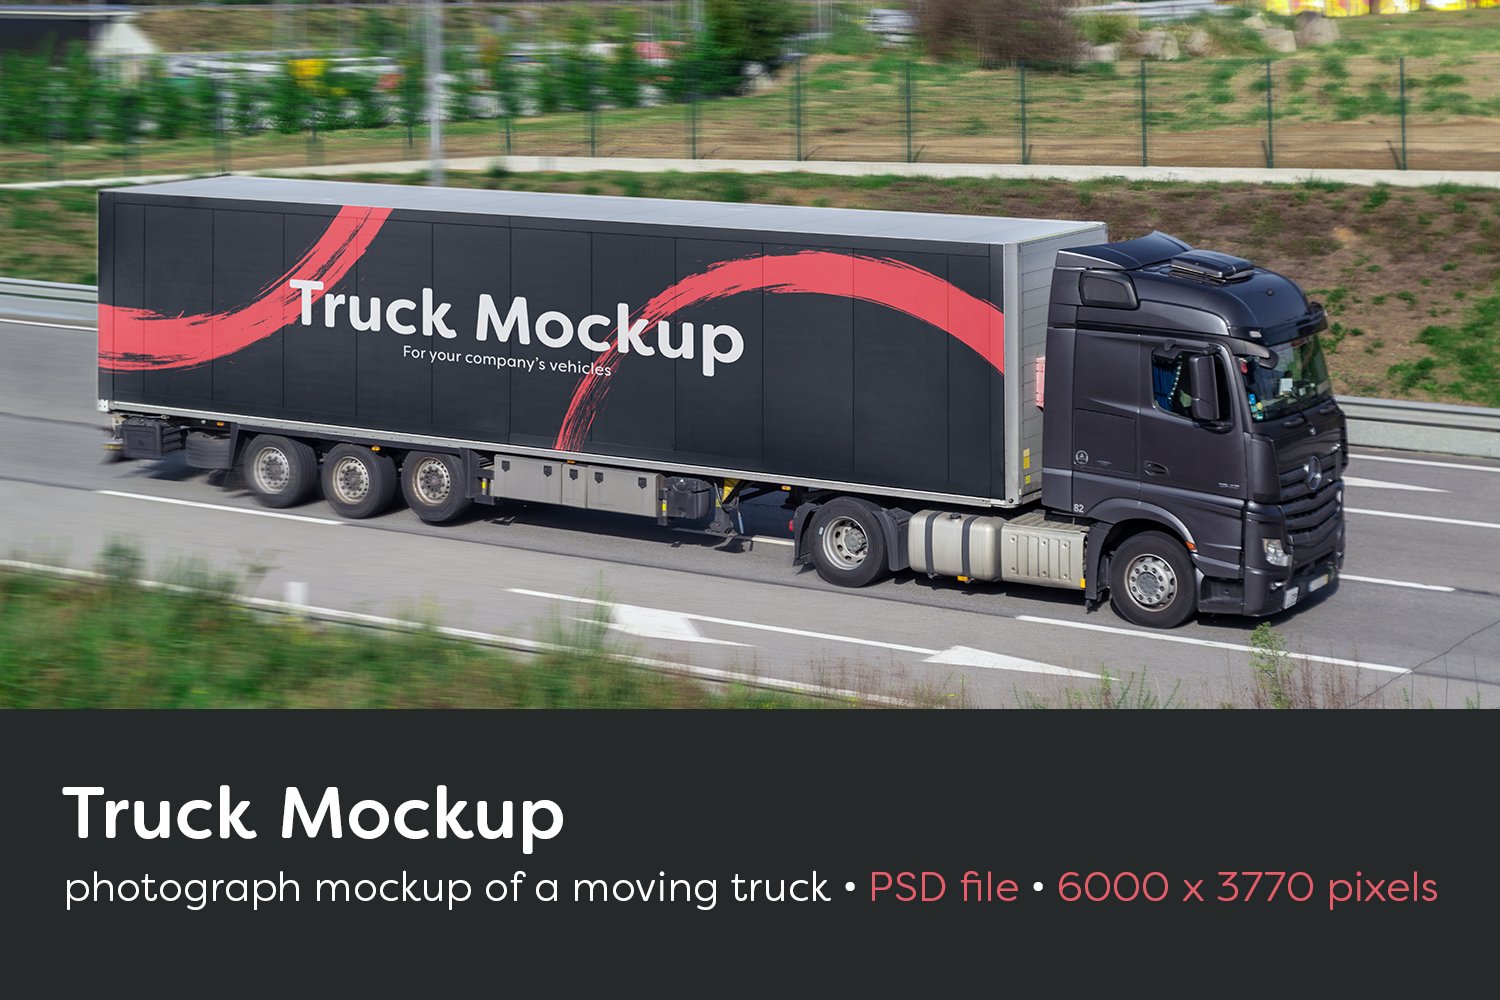 Moving Truck Mockup cover image.